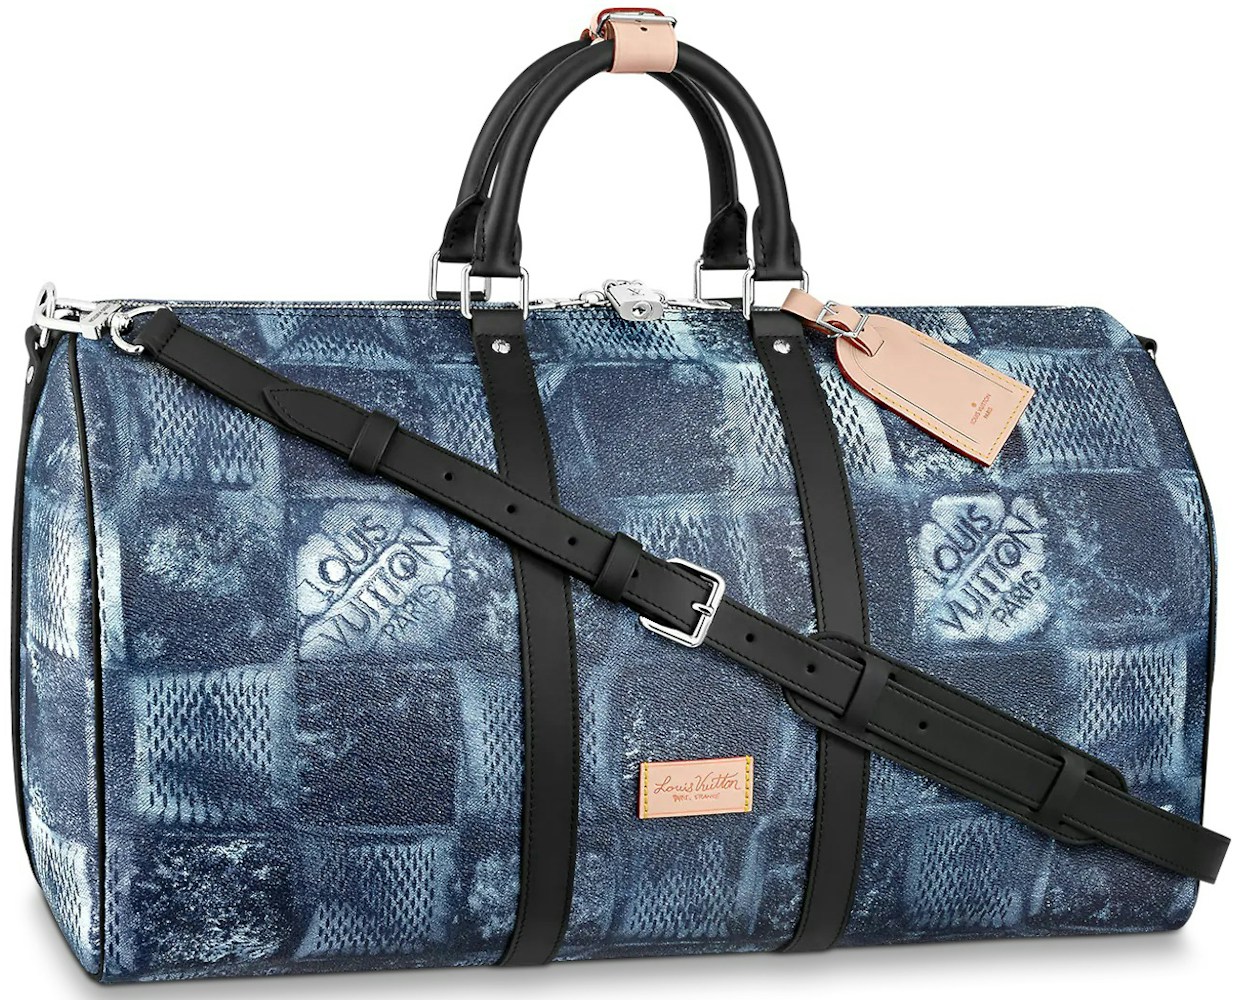 Vuitton Bandouliere 50 Damier Salt Marine in Coated Canvas with Silver-tone